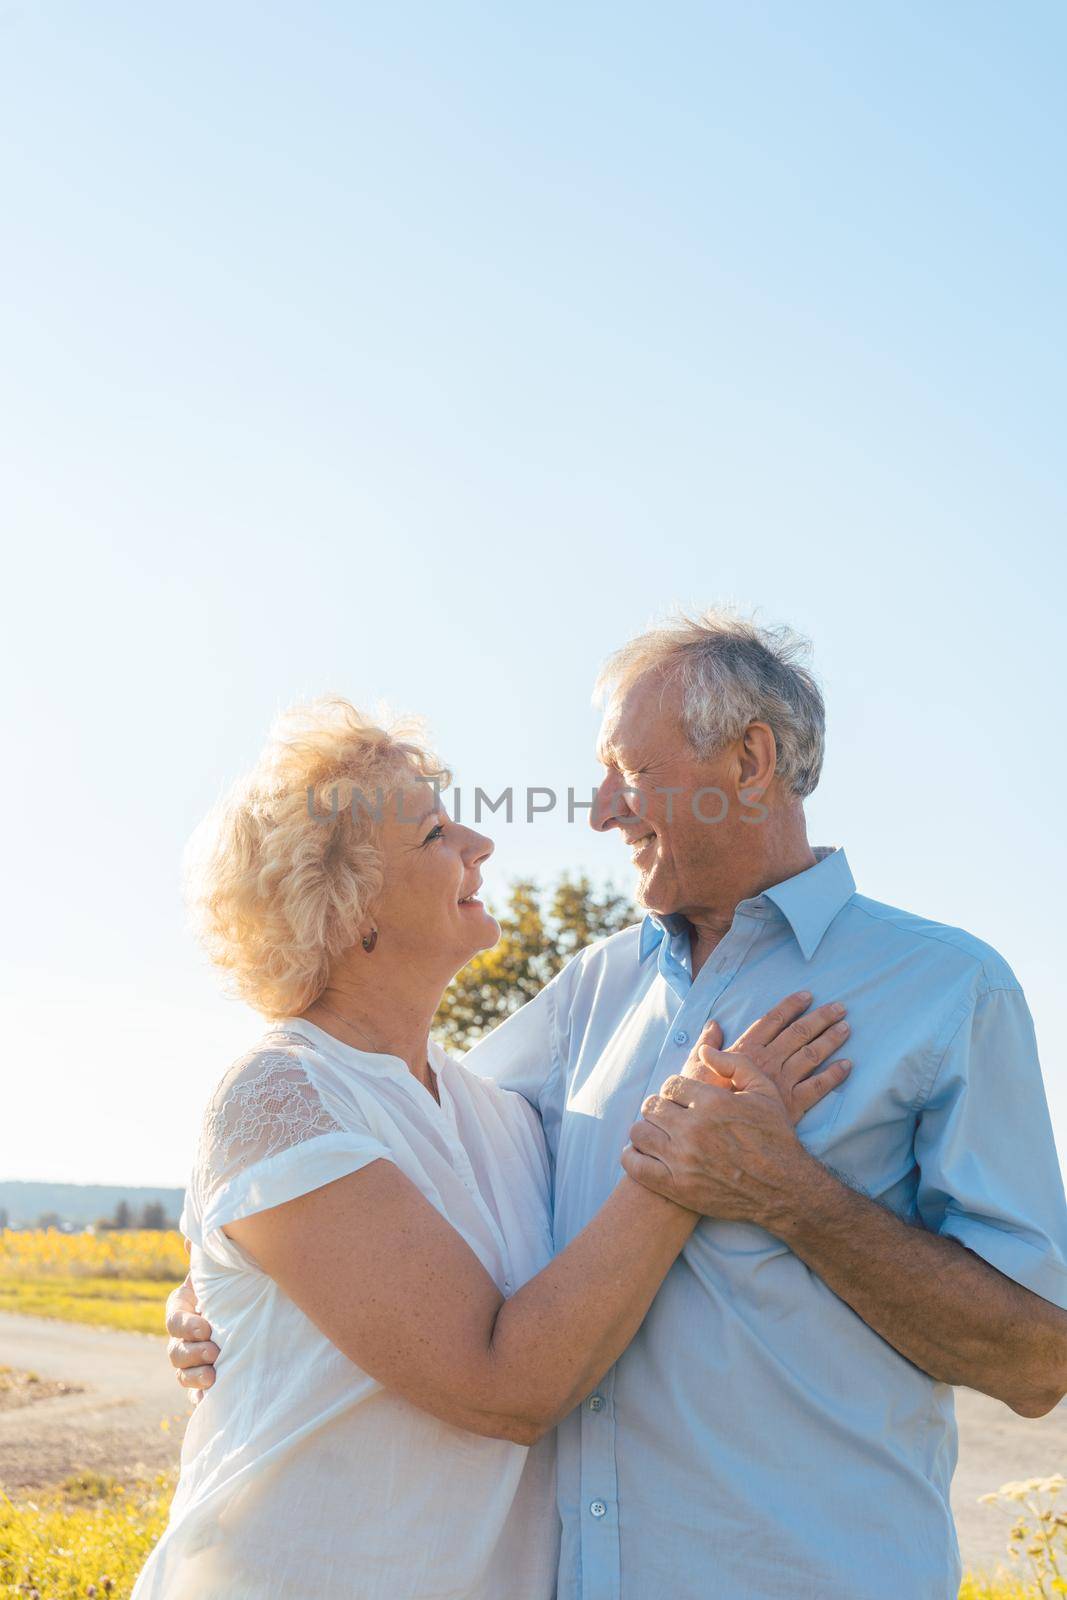 Romantic elderly couple enjoying health and nature in a sunny day by Kzenon